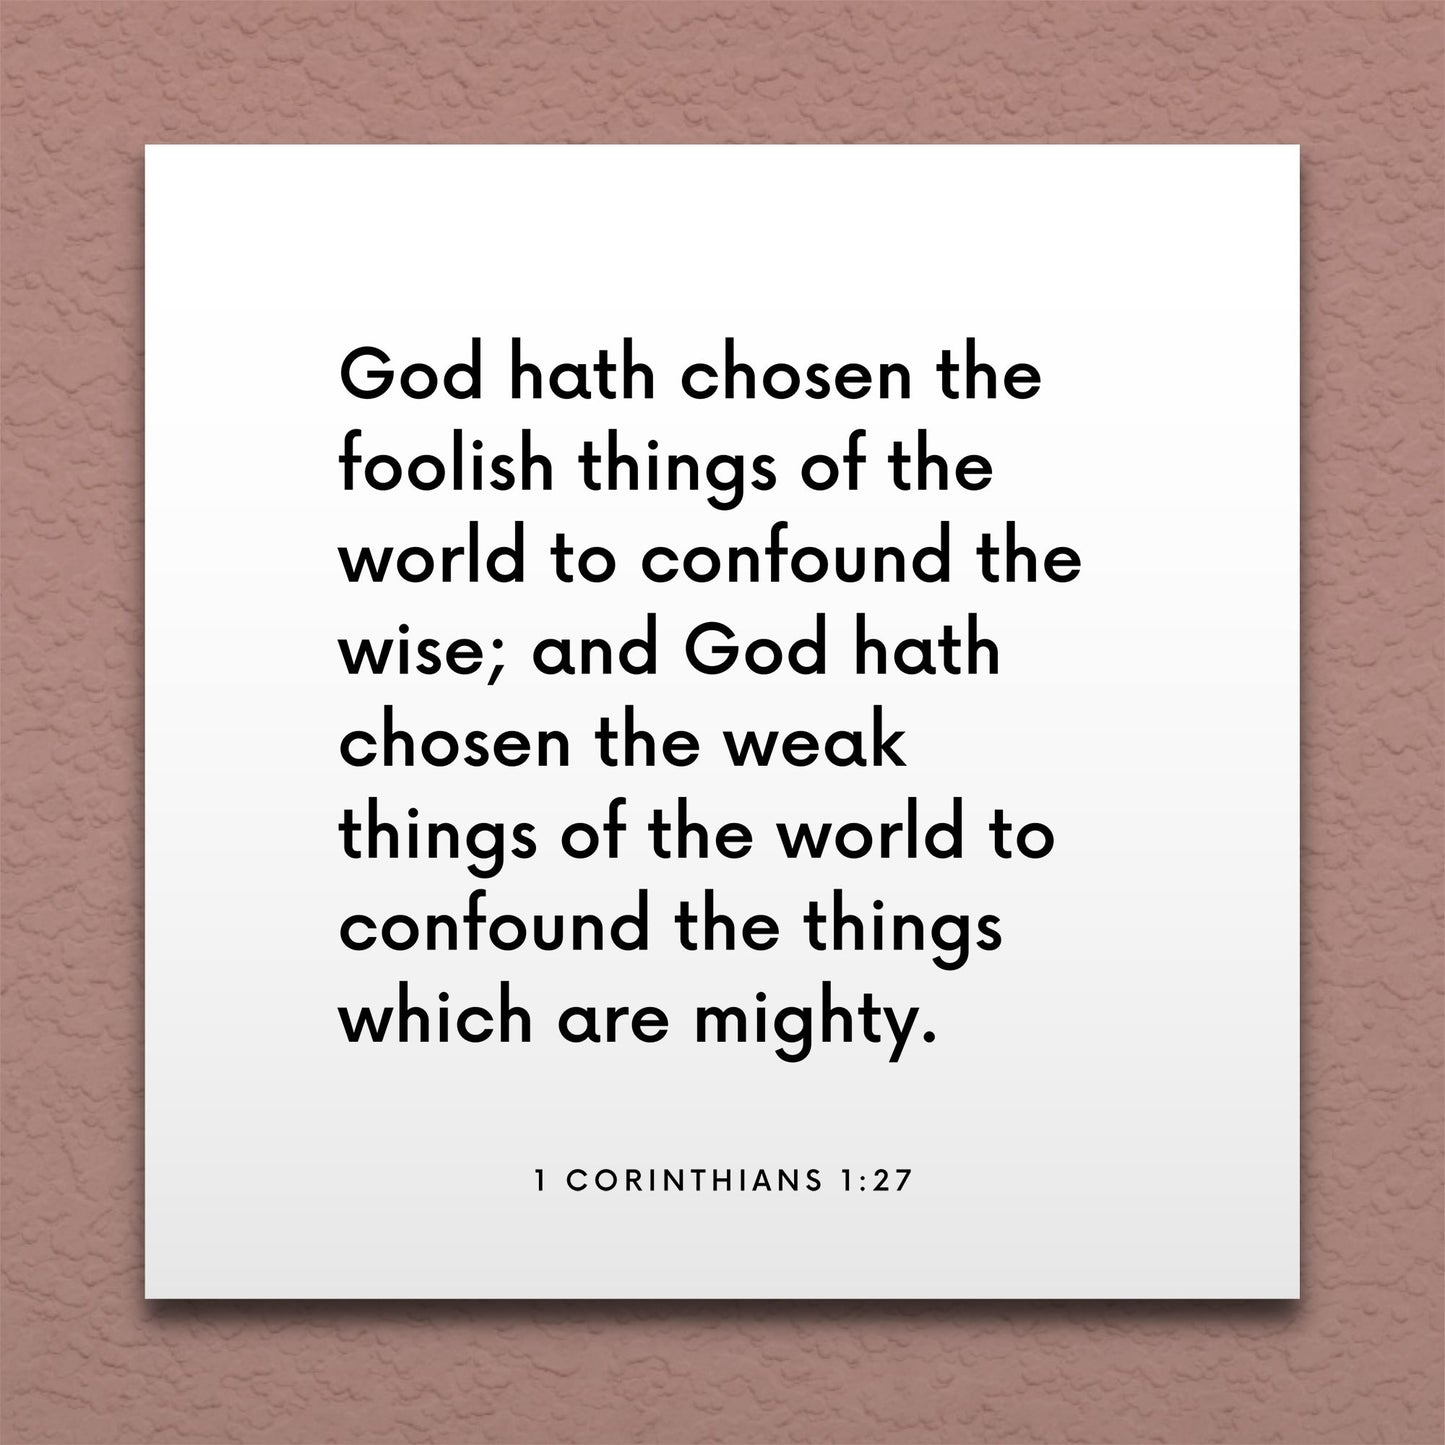 Wall-mounted scripture tile for 1 Corinthians 1:27 - "God hath chosen the foolish things of the world"